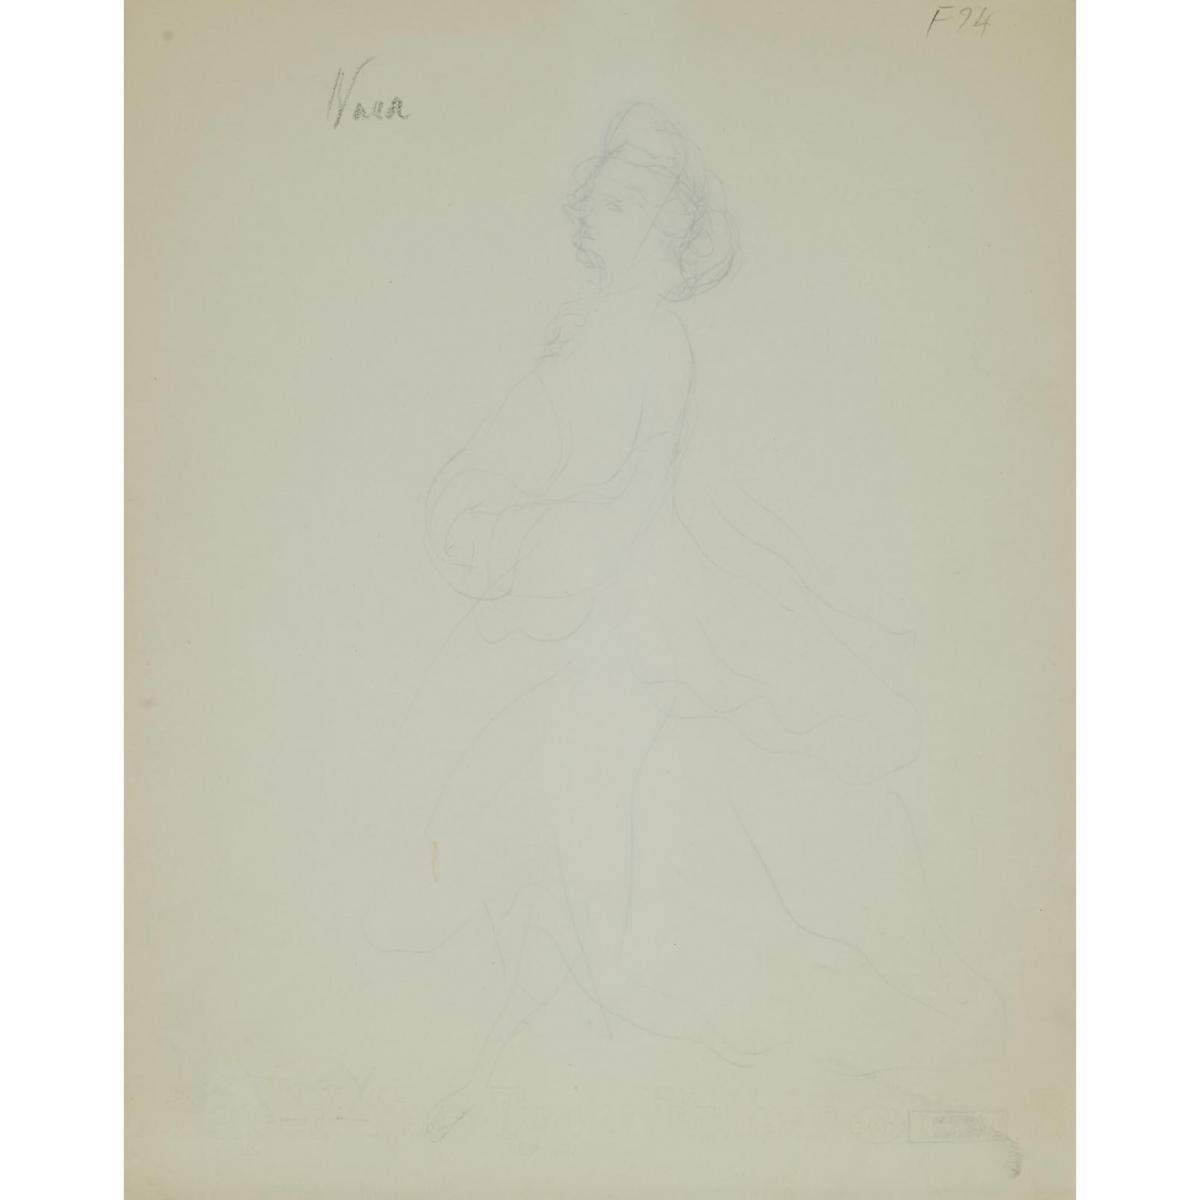 Various Artists, COLLECTION OF DRAWINGS, SOME 1956, Auguste François (Marie) Gorguet (1862-1927), Fr - Image 4 of 17